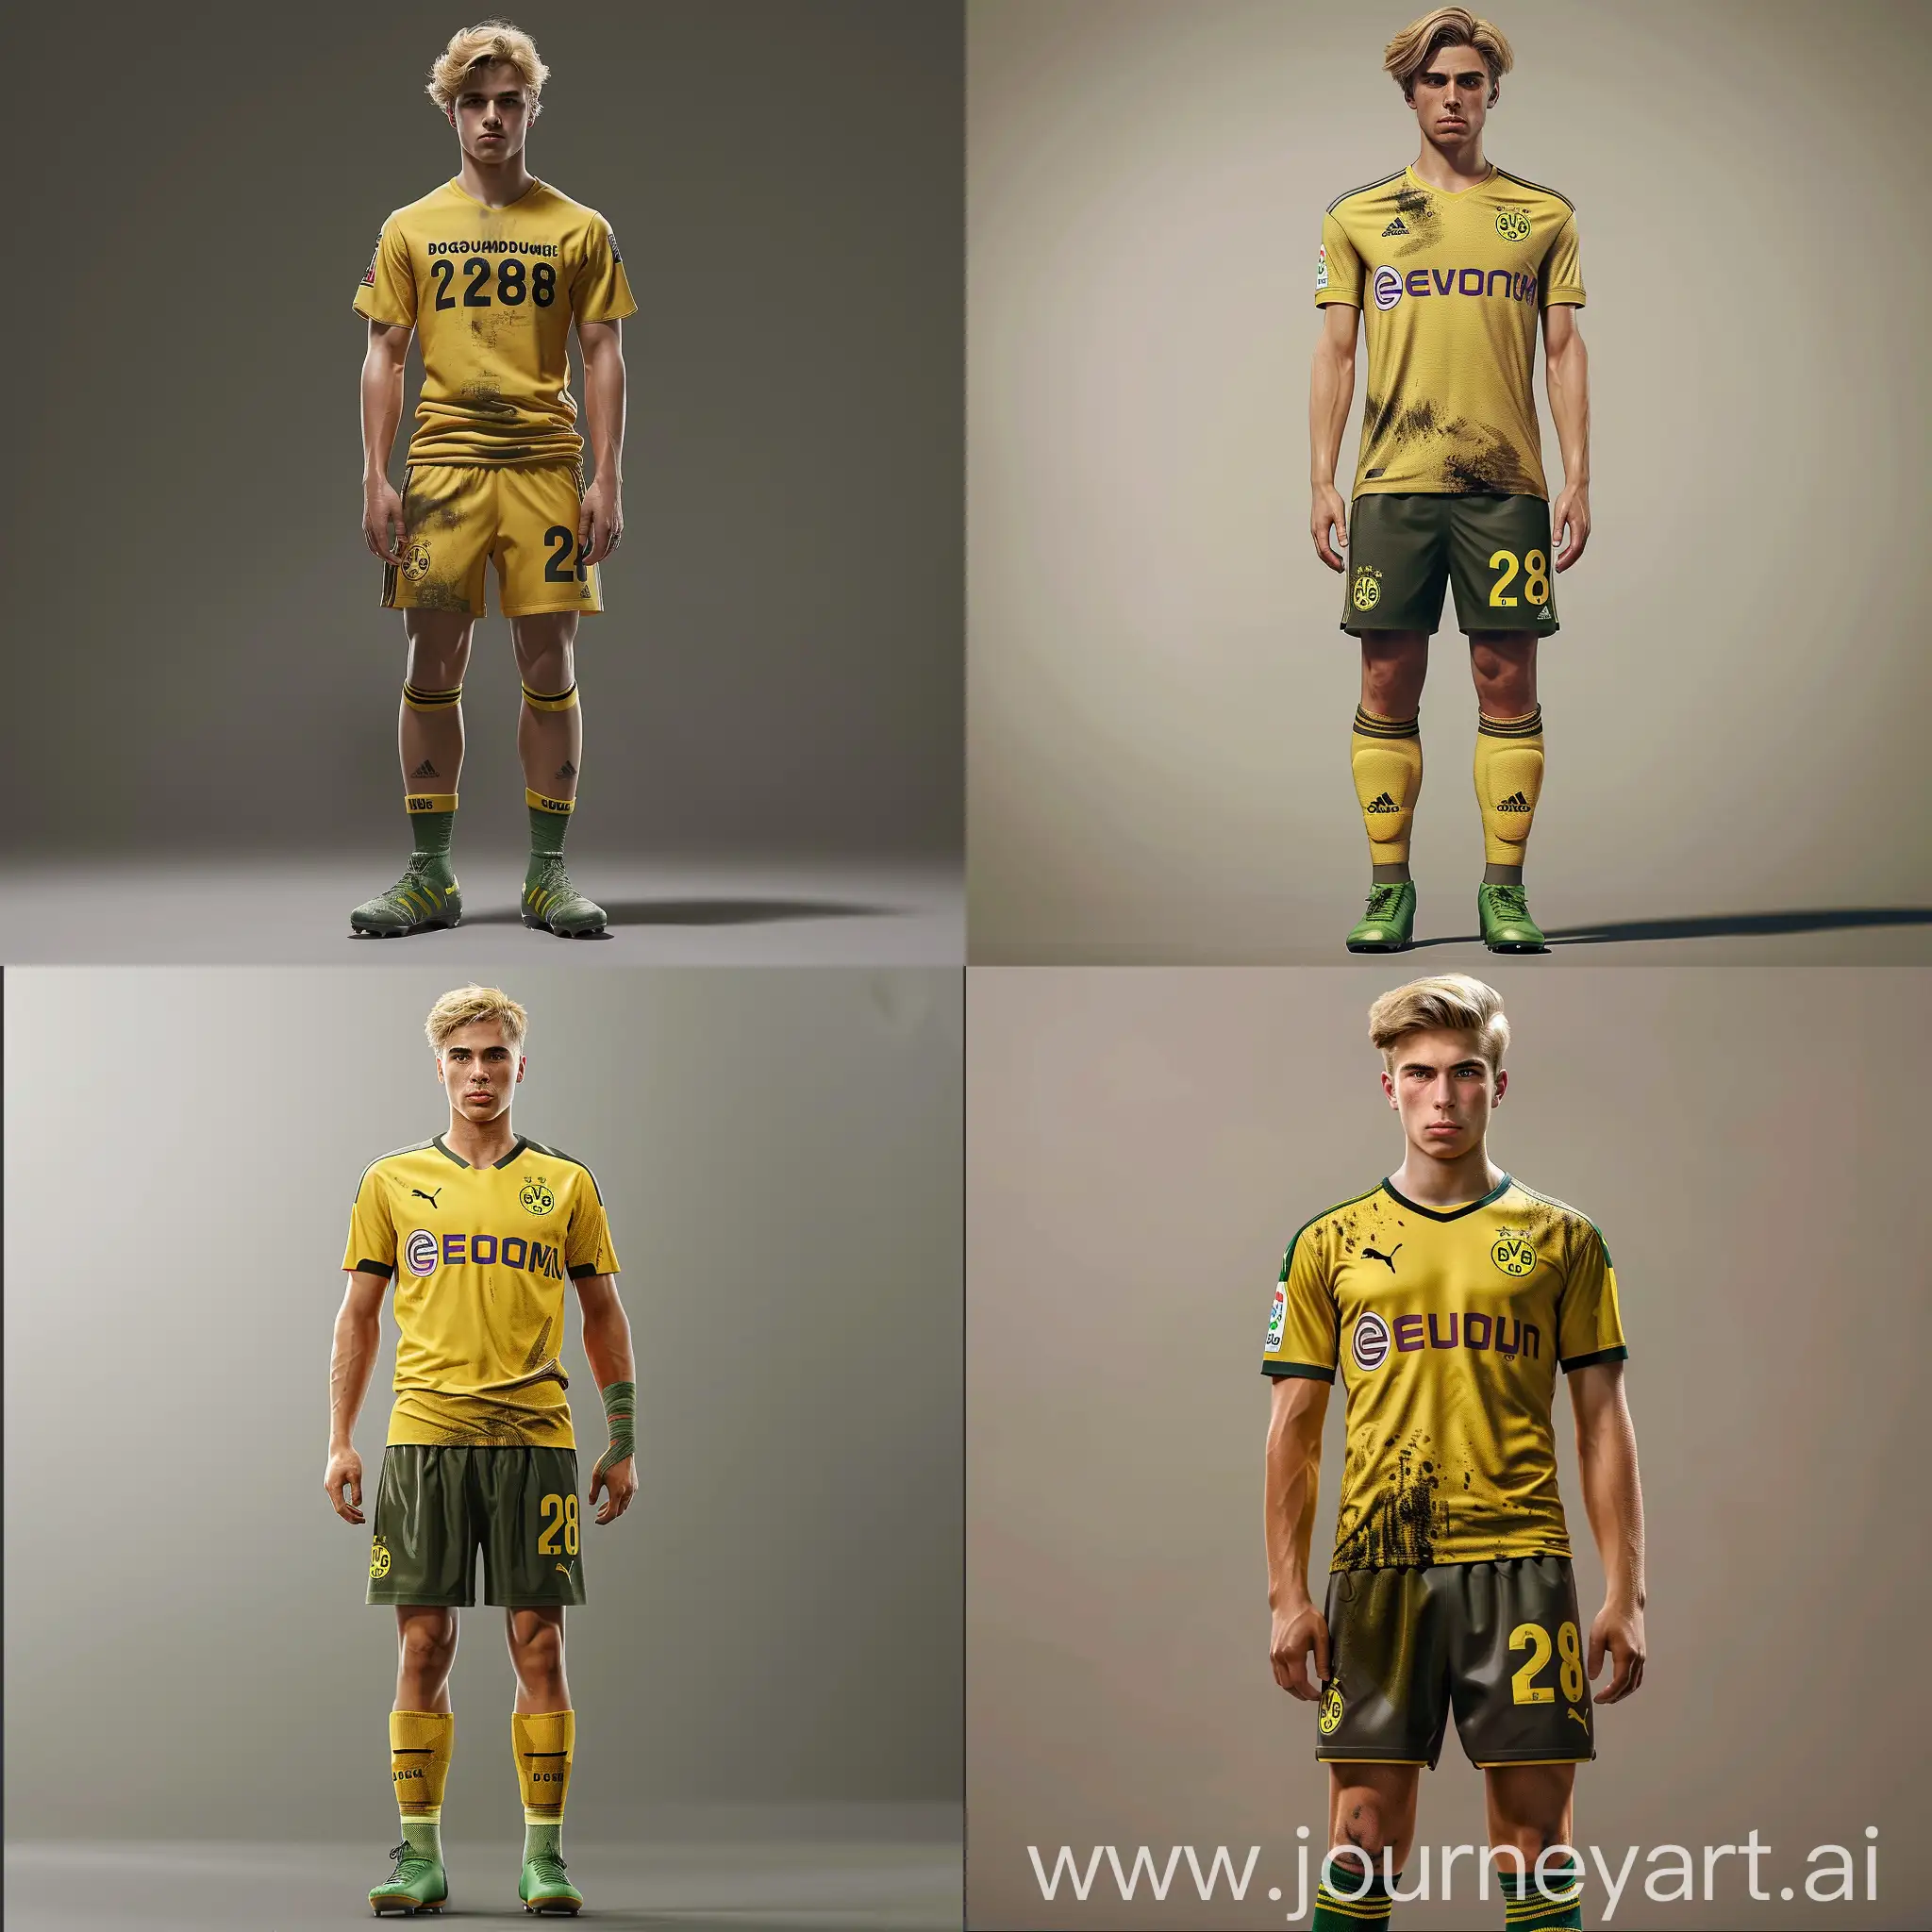 Blond, brown eyes, a sense of superiority on his face, hairstyle curtains, standard build, Borussia Dortmund T-shirt, Borussia Dortmund shorts with number 28, green adidas boots, charismatic, nationality German, 17 years old, male, realistic style, full-length, similar to Lothar Matthäus